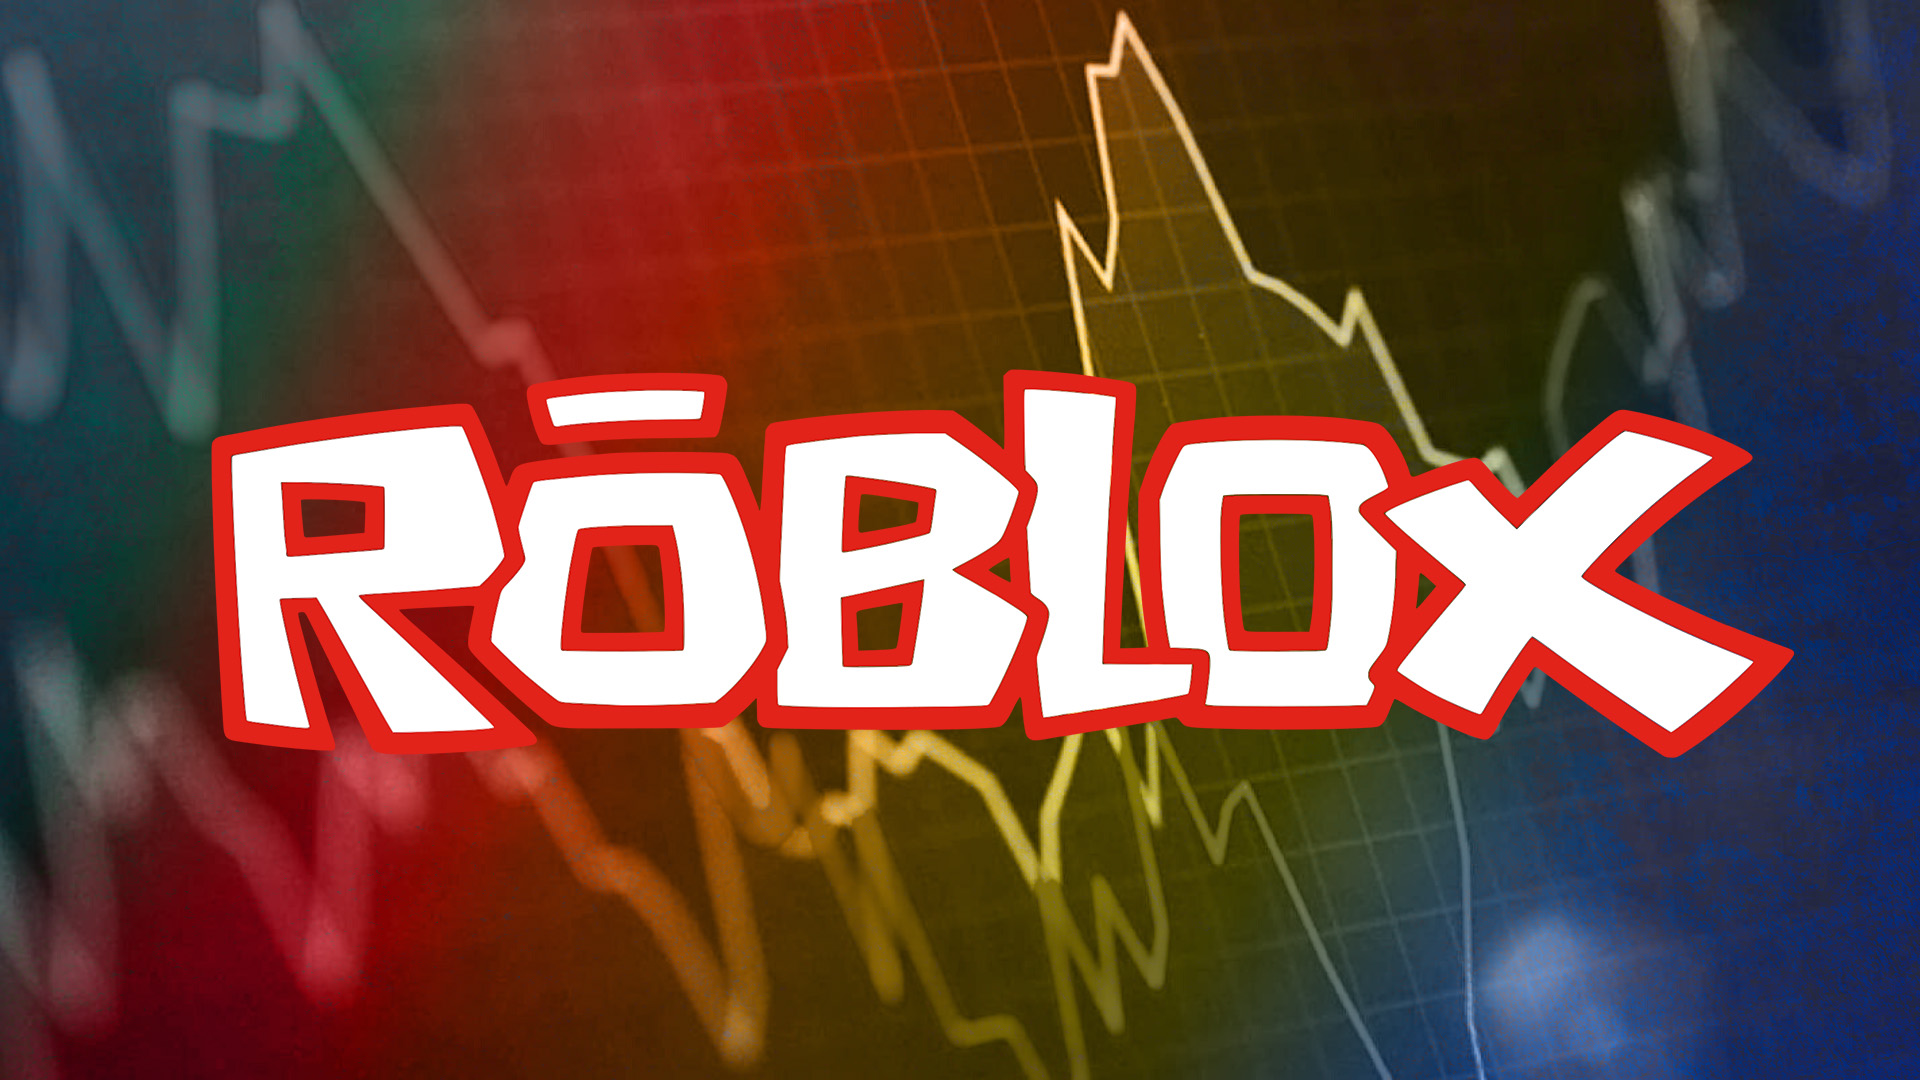 Roblox Shows Real Strength in Virtual World: Q2 Preview